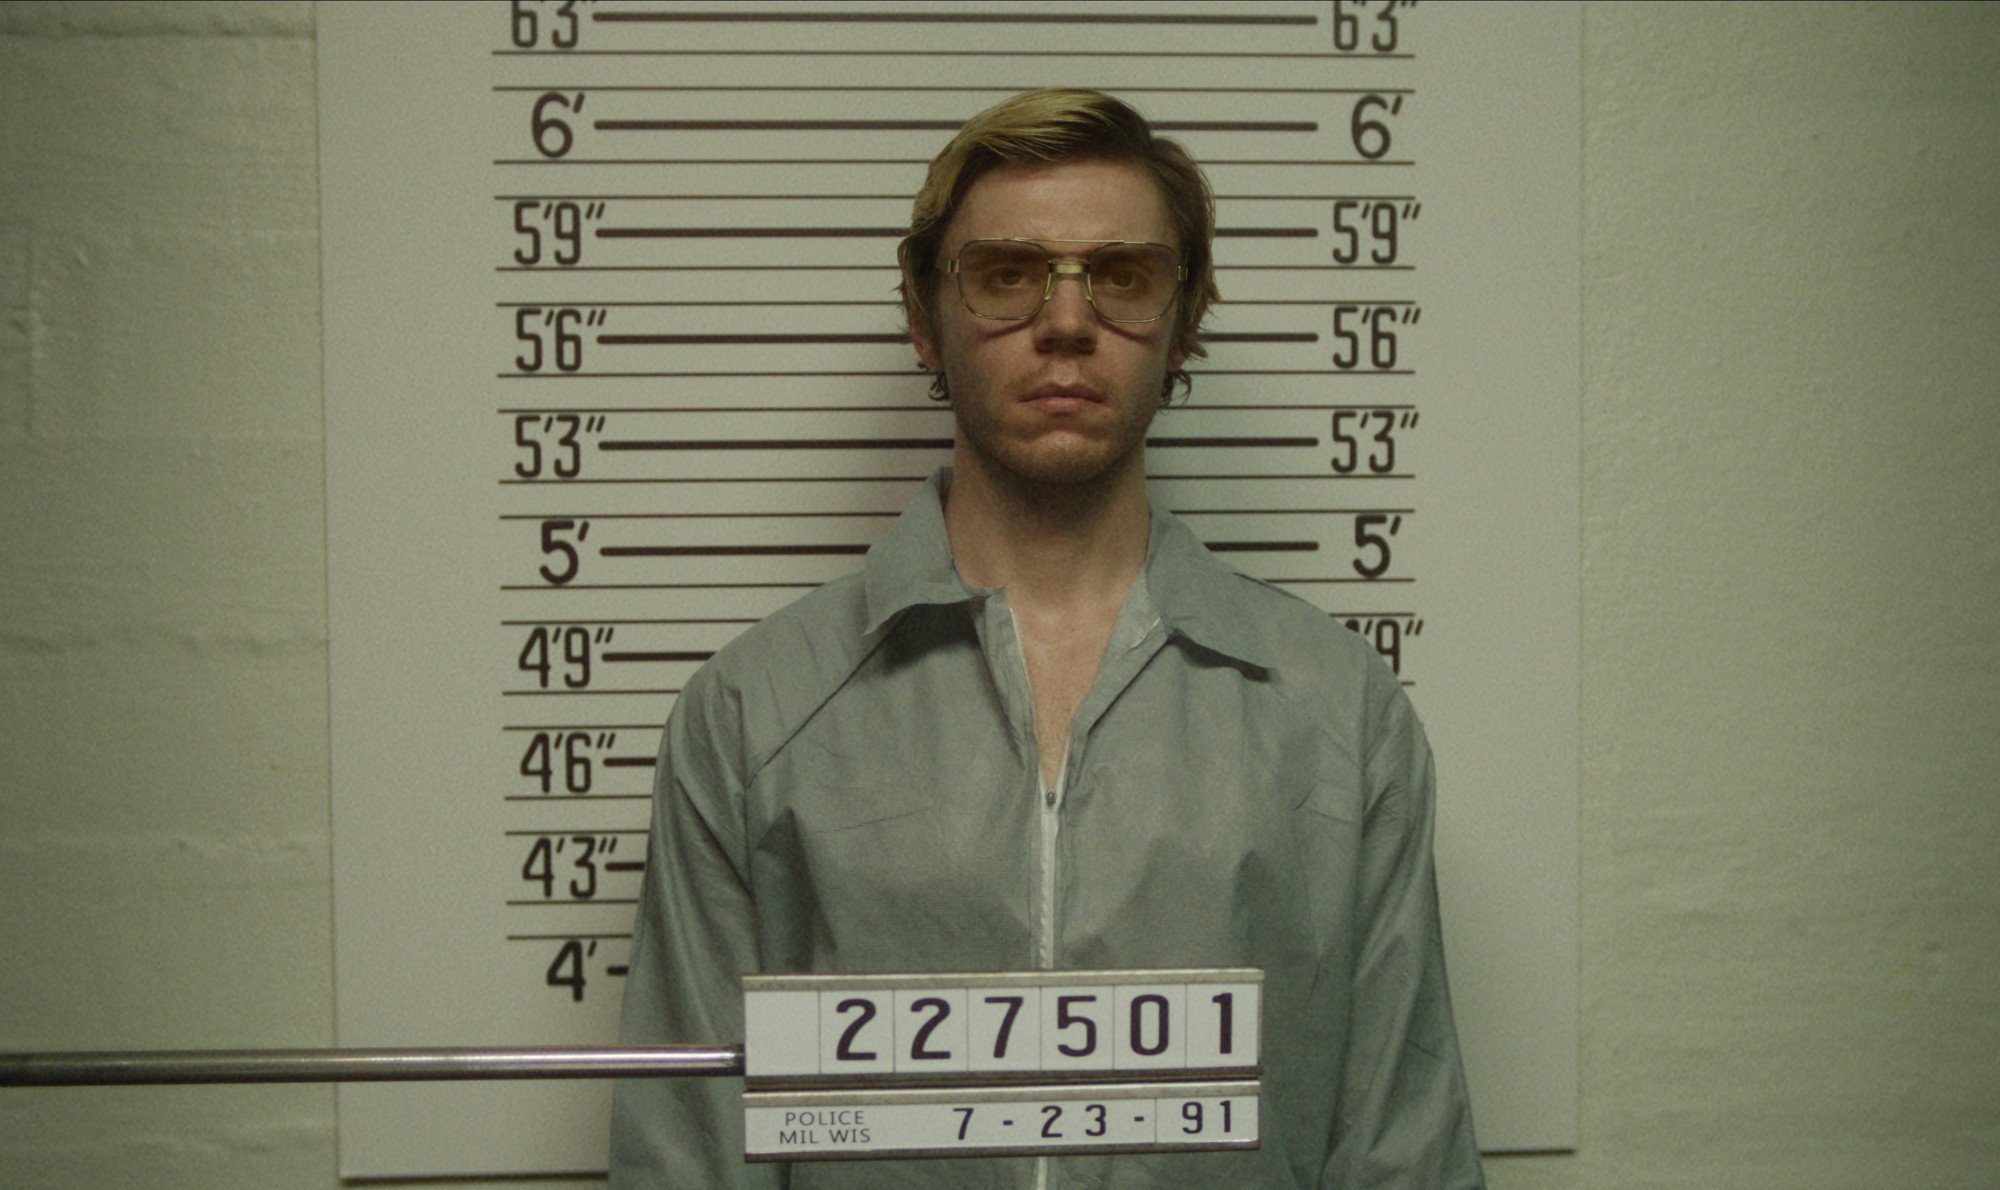 Evan Peters as Jeffrey Dahmer in 'Monster: The Jeffrey Dahmer Story' for our article about its initial ratings. He's taking a prison photo wearing glasses and a grey collared shirt.